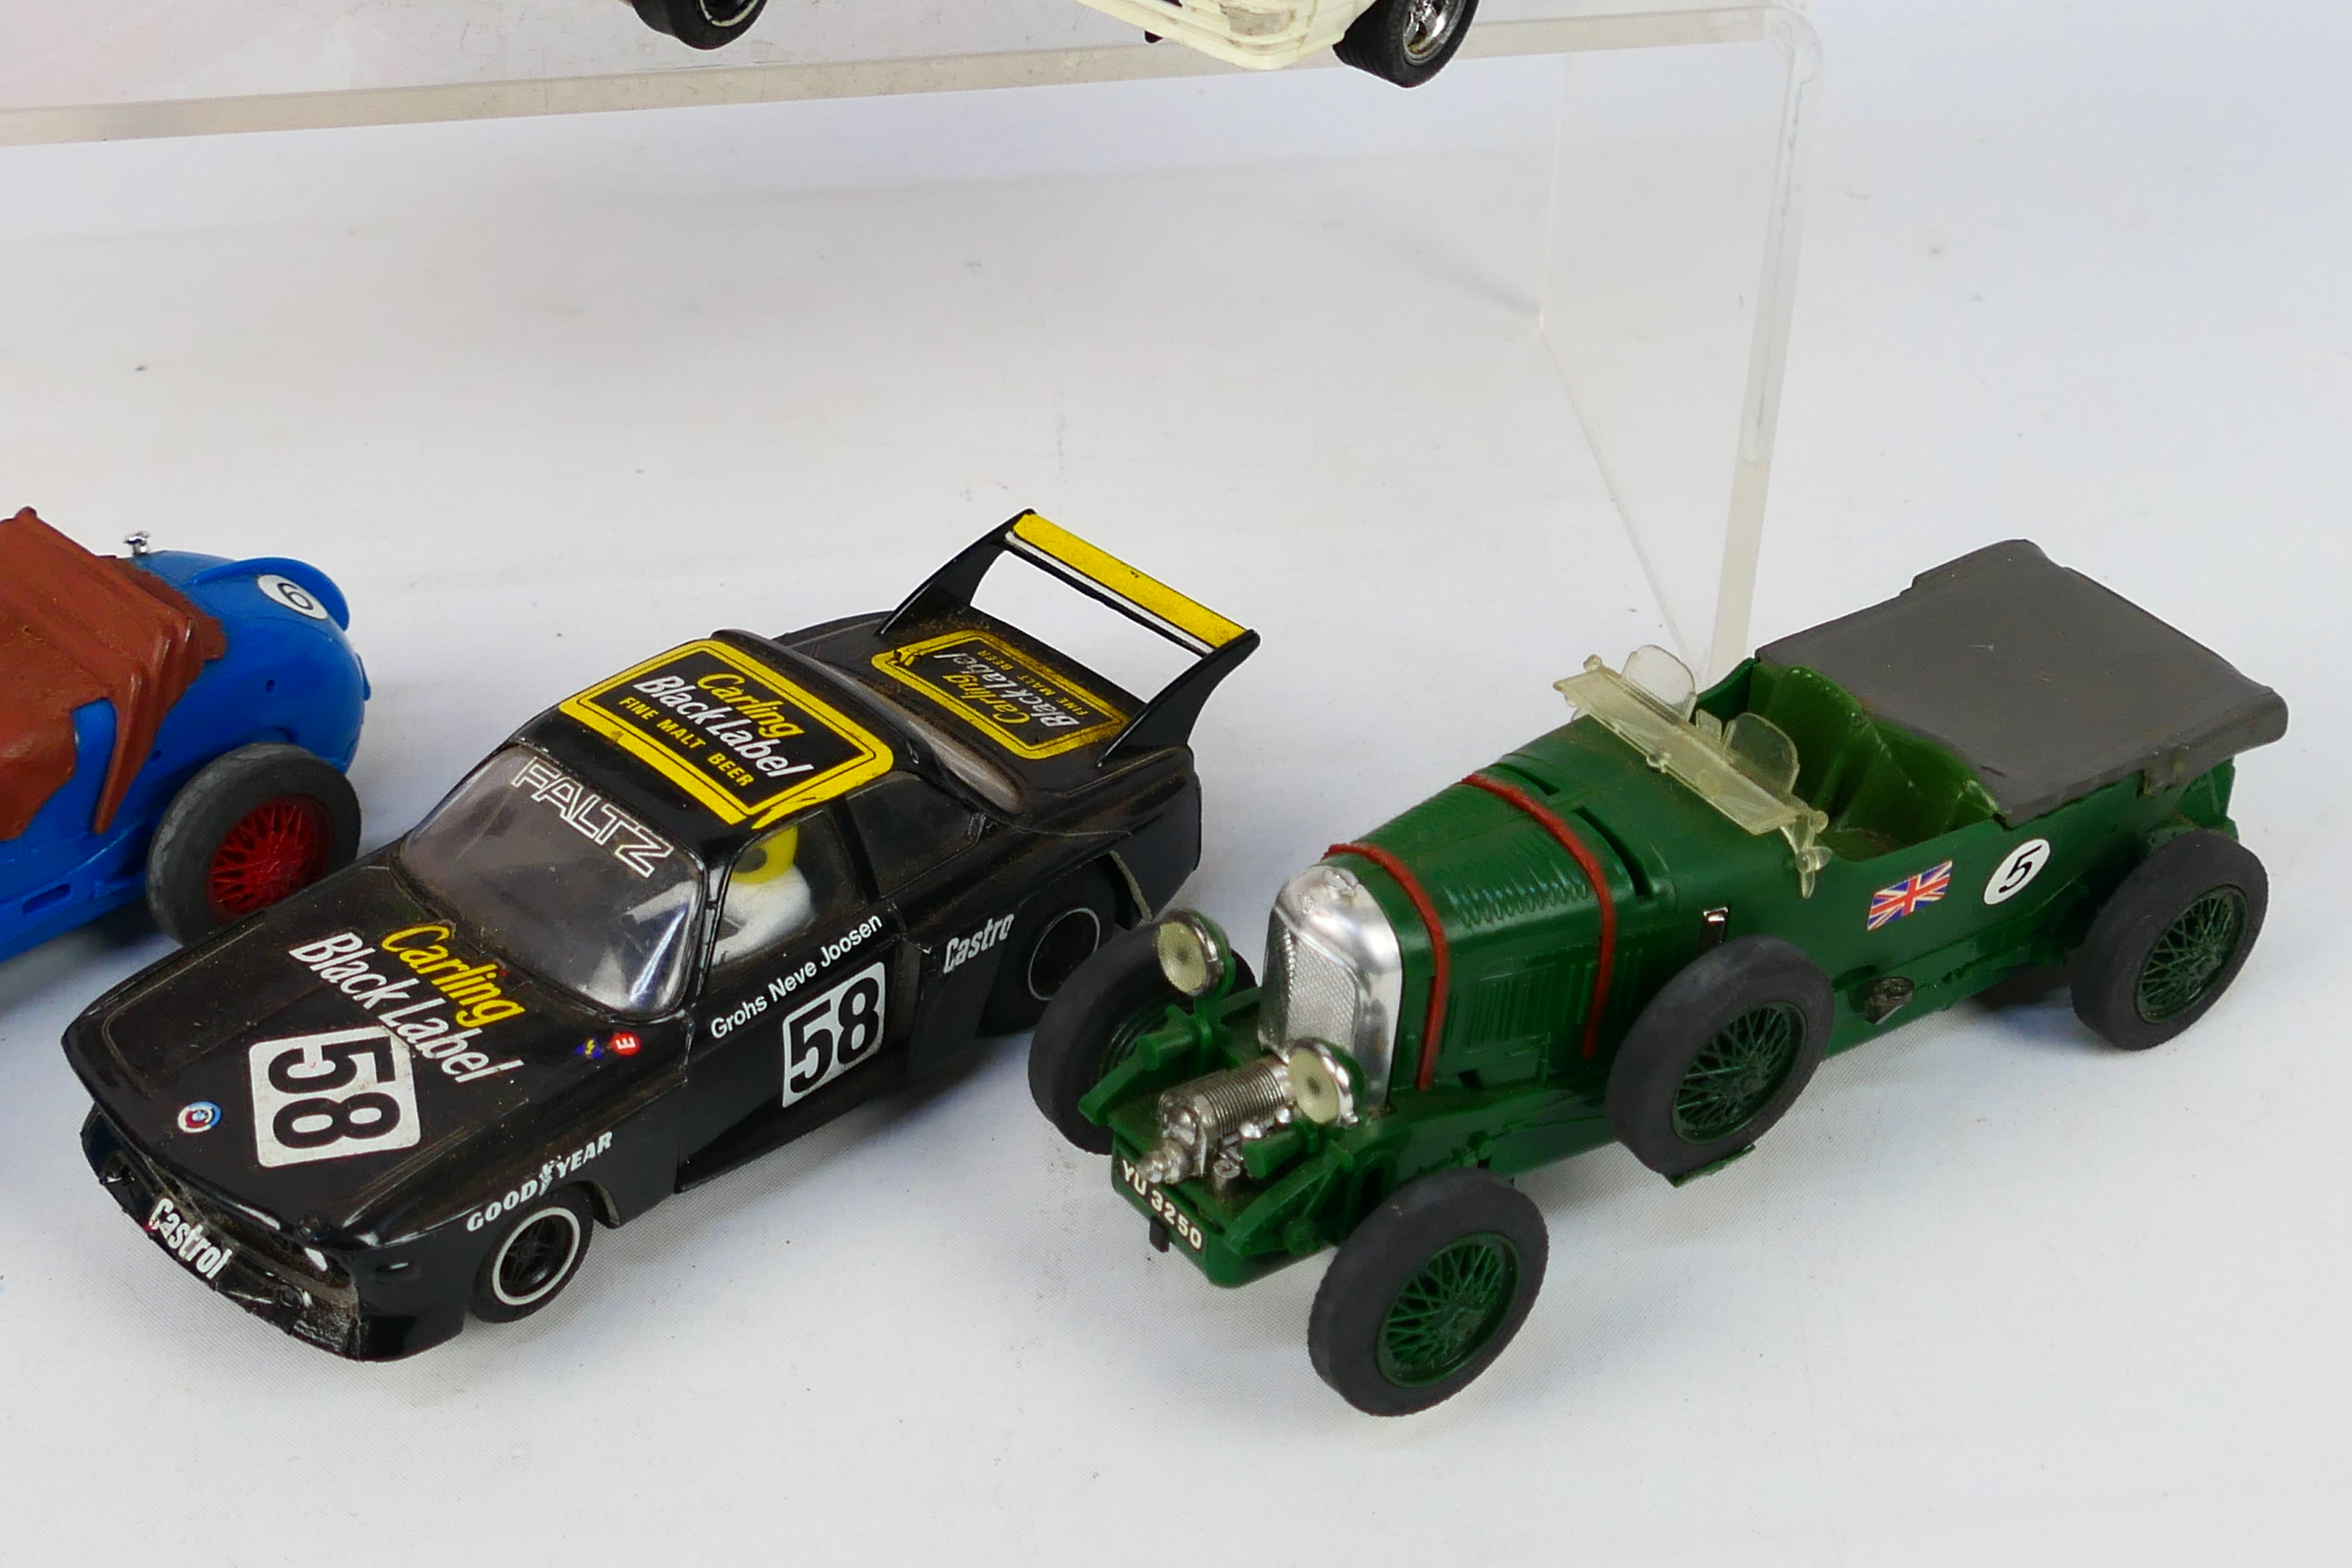 Scalextric - A collection of unboxed vintage Scalextric cars from the 1960s including a 4. - Image 4 of 4